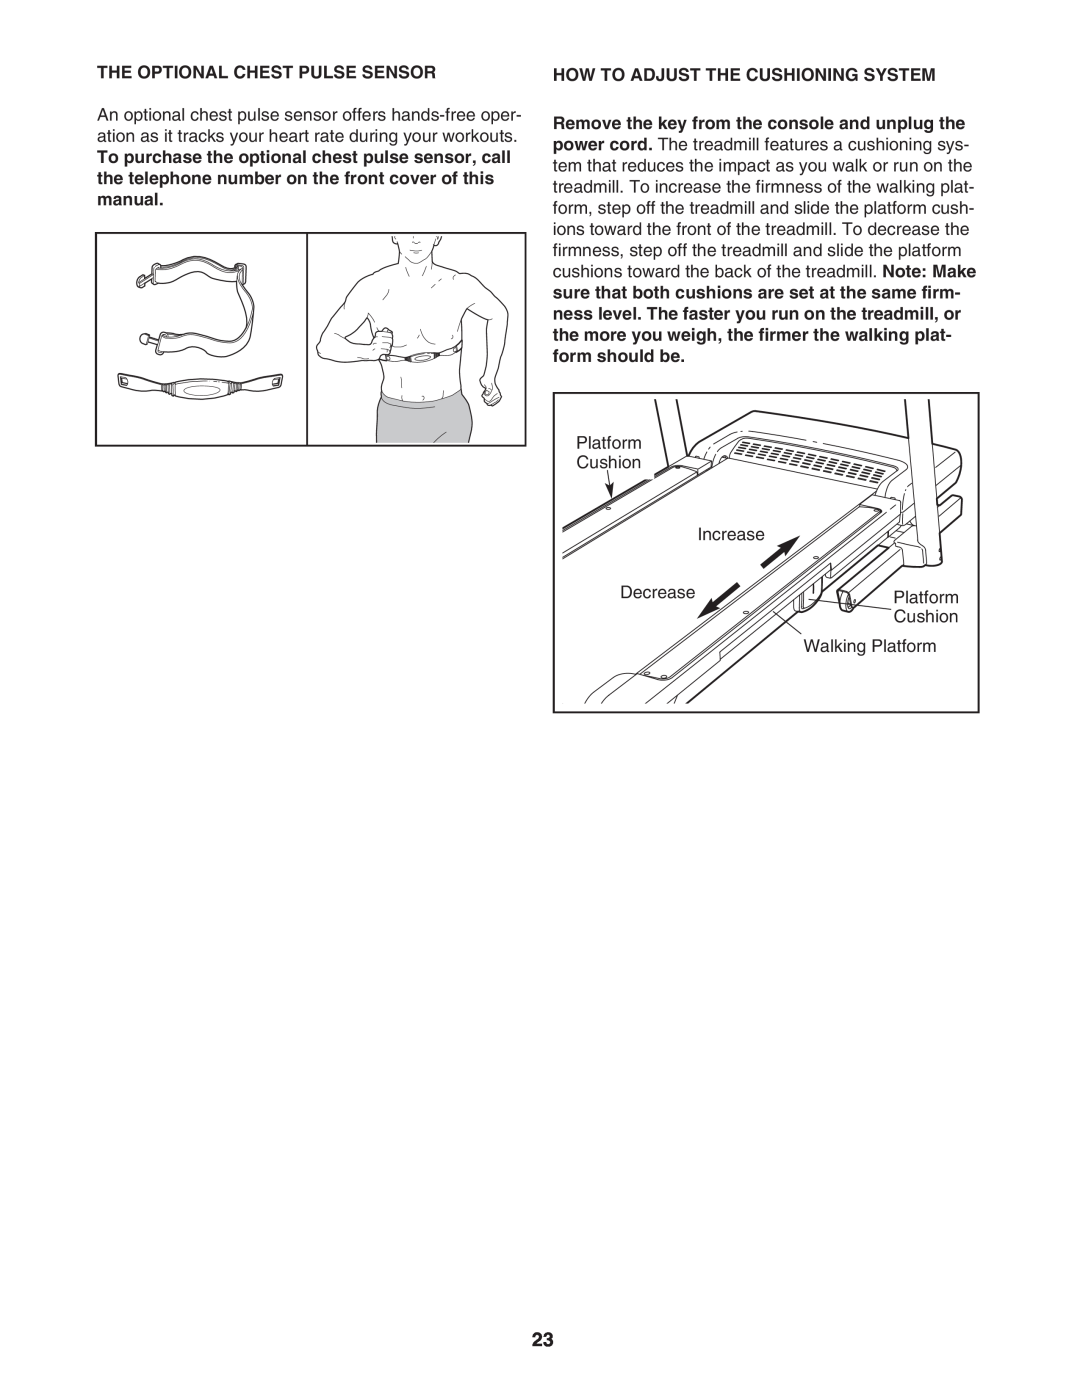 NordicTrack NTL09007.0 user manual The Optional Chest Pulse Sensor, How To Adjust The Cushioning System 